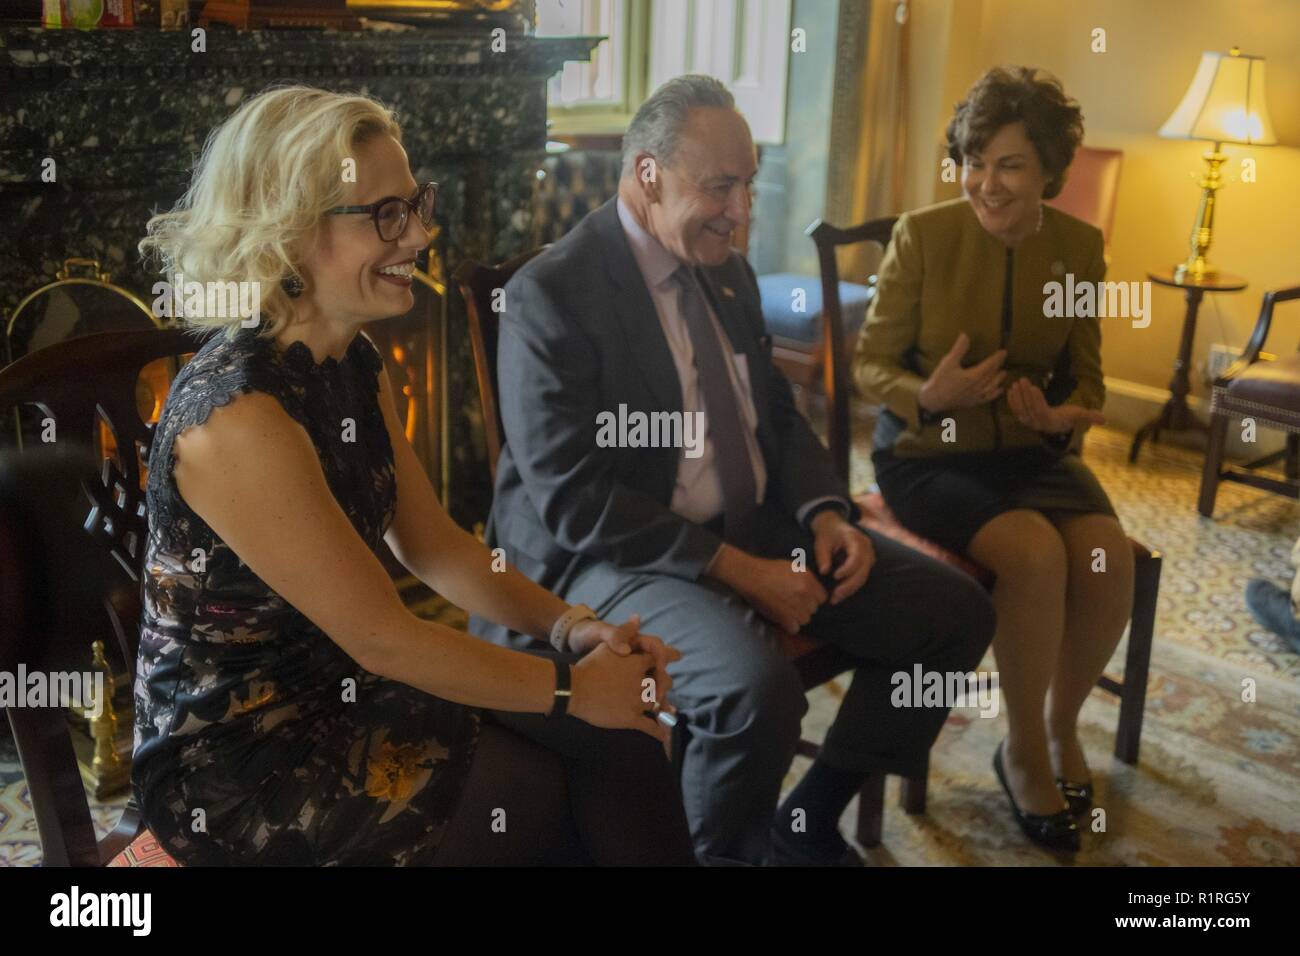 Washington, District of Columbia, USA. 13th Nov, 2018. Senate Minority Leader CHUCK SCHUMER introduces KYRSTEN SINEMA of Arizona and JACKY ROSEN of Nevada. SCHUMER calls the newly-minted Democratic Senators as 'Woman of the West'' in previously traditionally red states. SINEMA took the seat previously held by Republican Senator JEFF FLAKE and ROSEN beat Republican Senator DEAN HELLER. Credit: Douglas Christian/ZUMA Wire/Alamy Live News Stock Photo